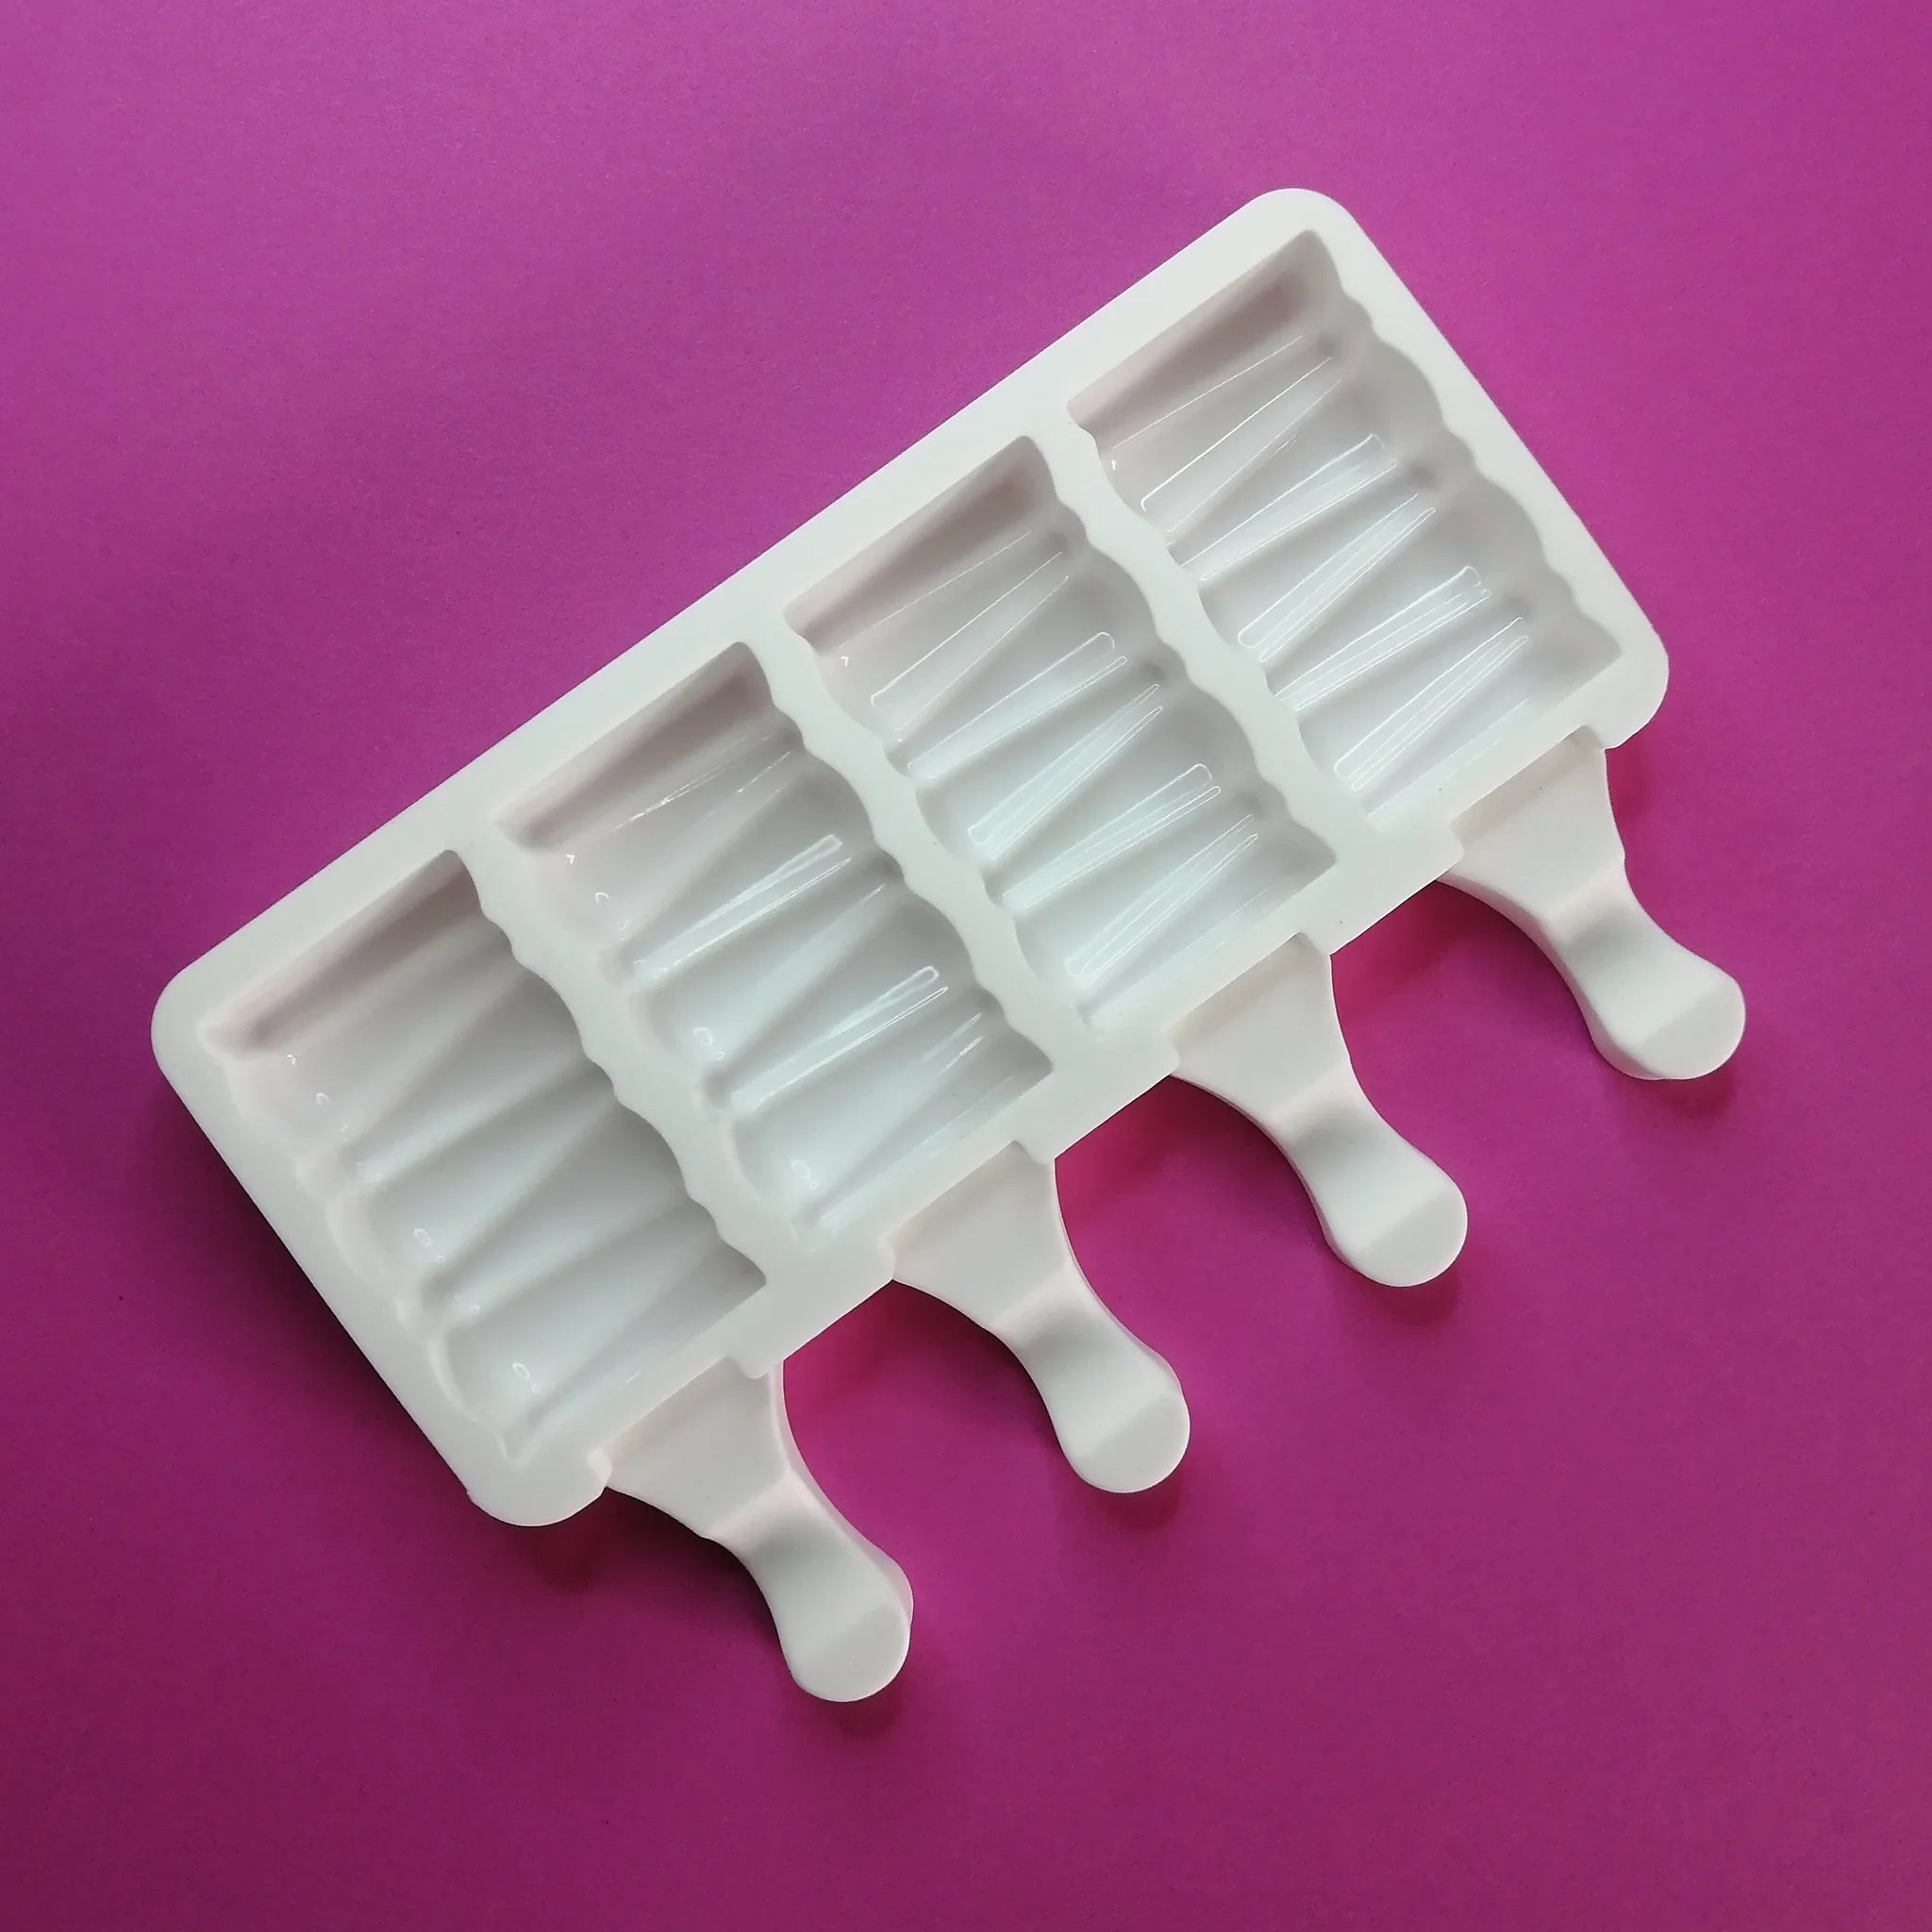 Silicone Ice mould water tray 4-Division with 50pcs Wooden Sticks